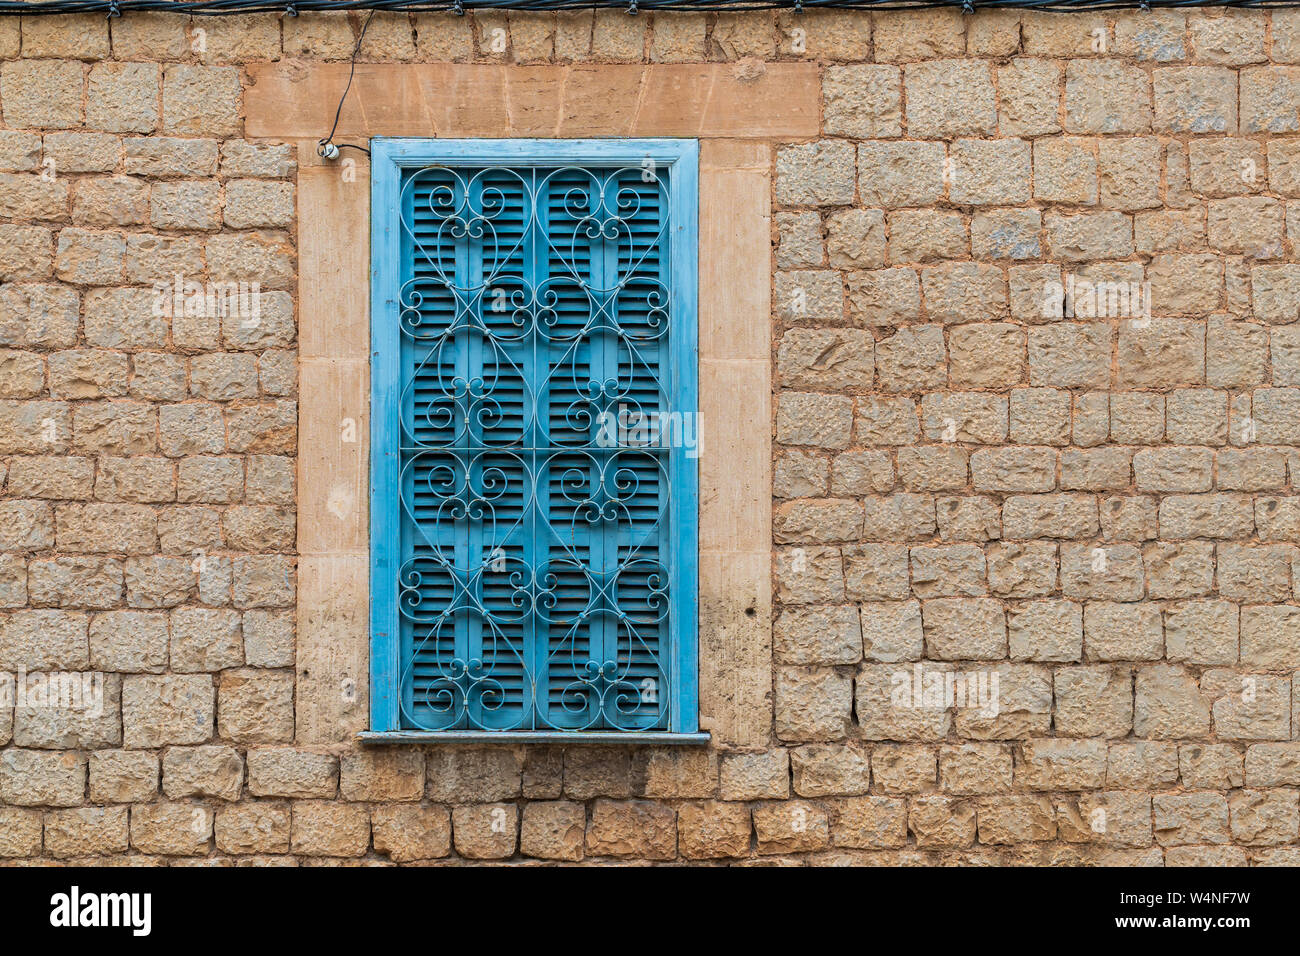 Turquoise window shutters with heart-shaped window grating in a brick wall facade in Valldemossa, Majorca, Spain - head-on view, landscape format, cop Stock Photo